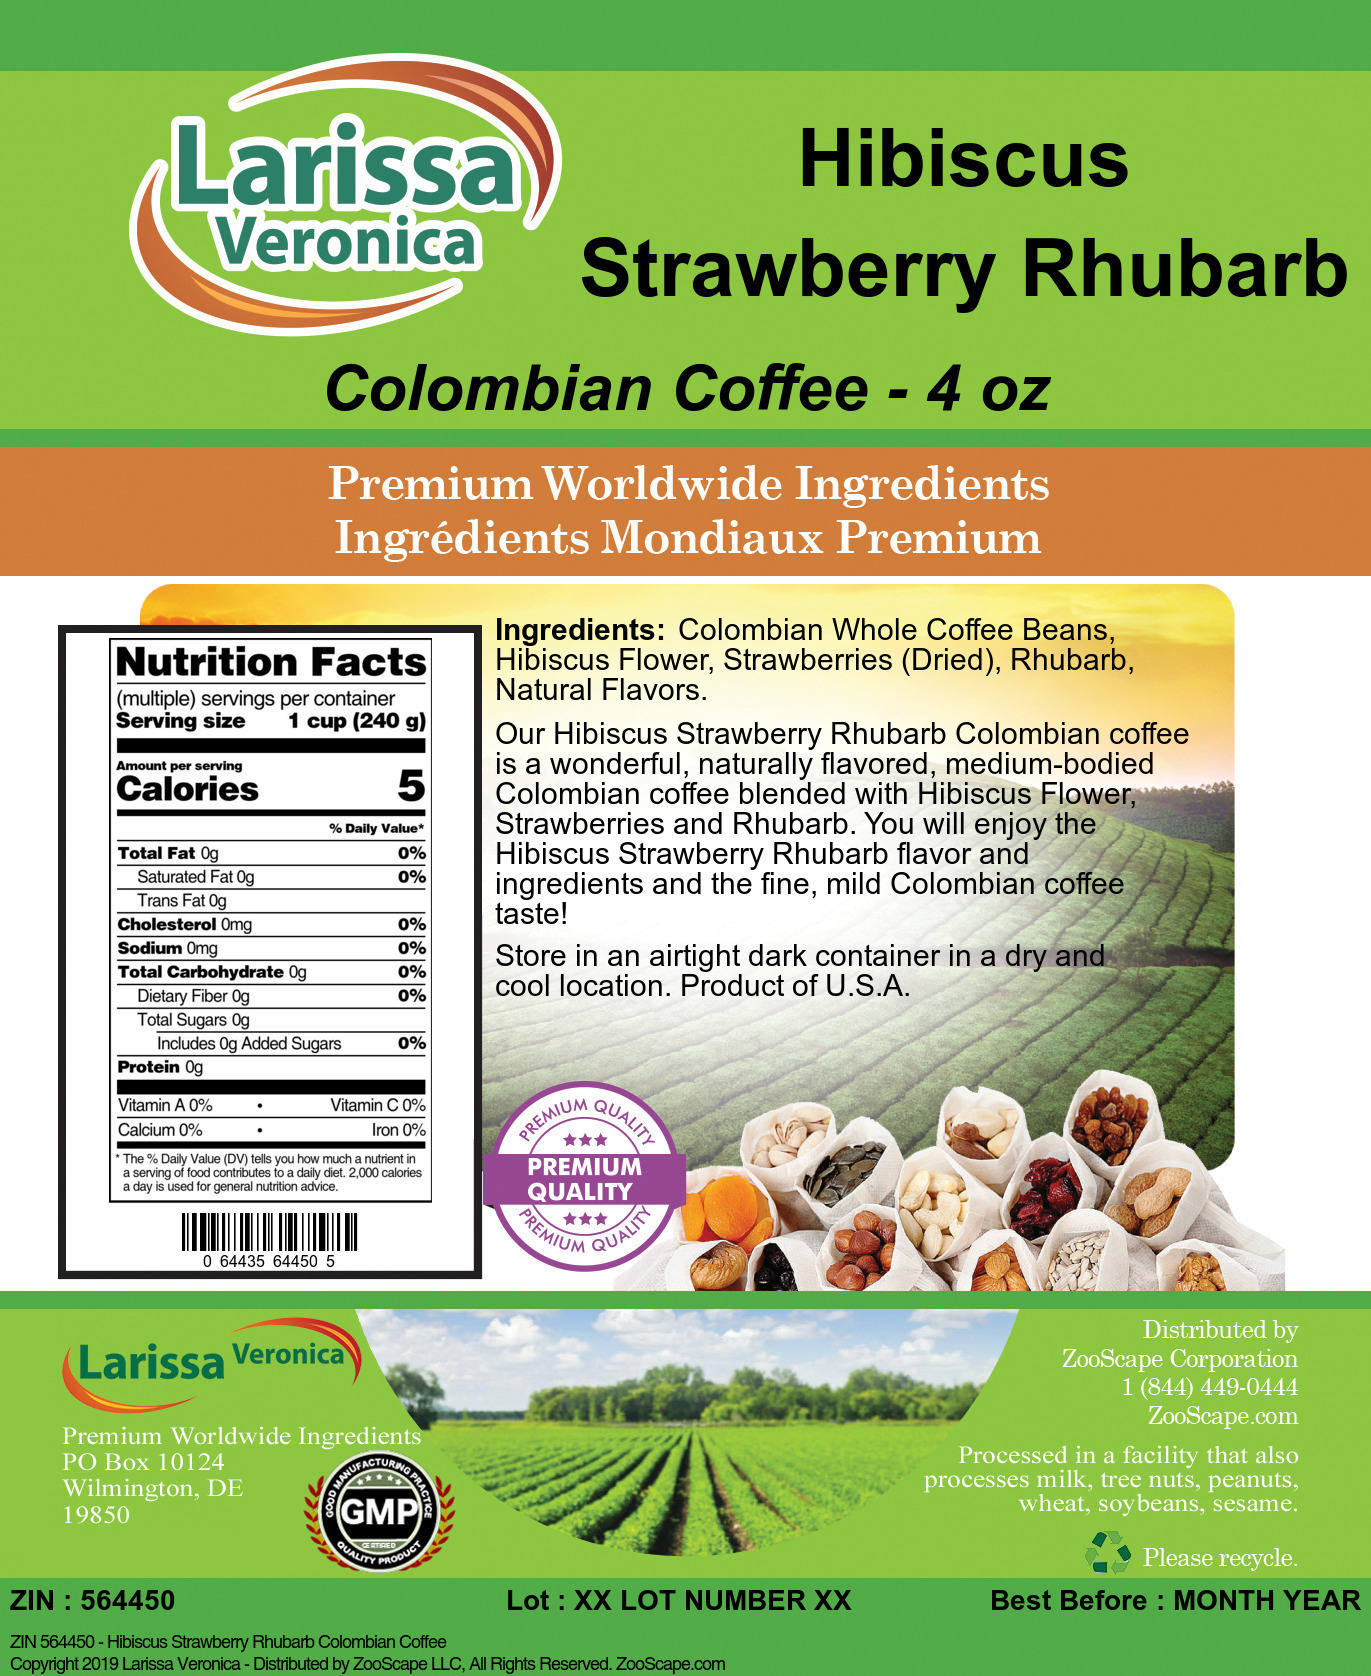 Hibiscus Strawberry Rhubarb Colombian Coffee - Label